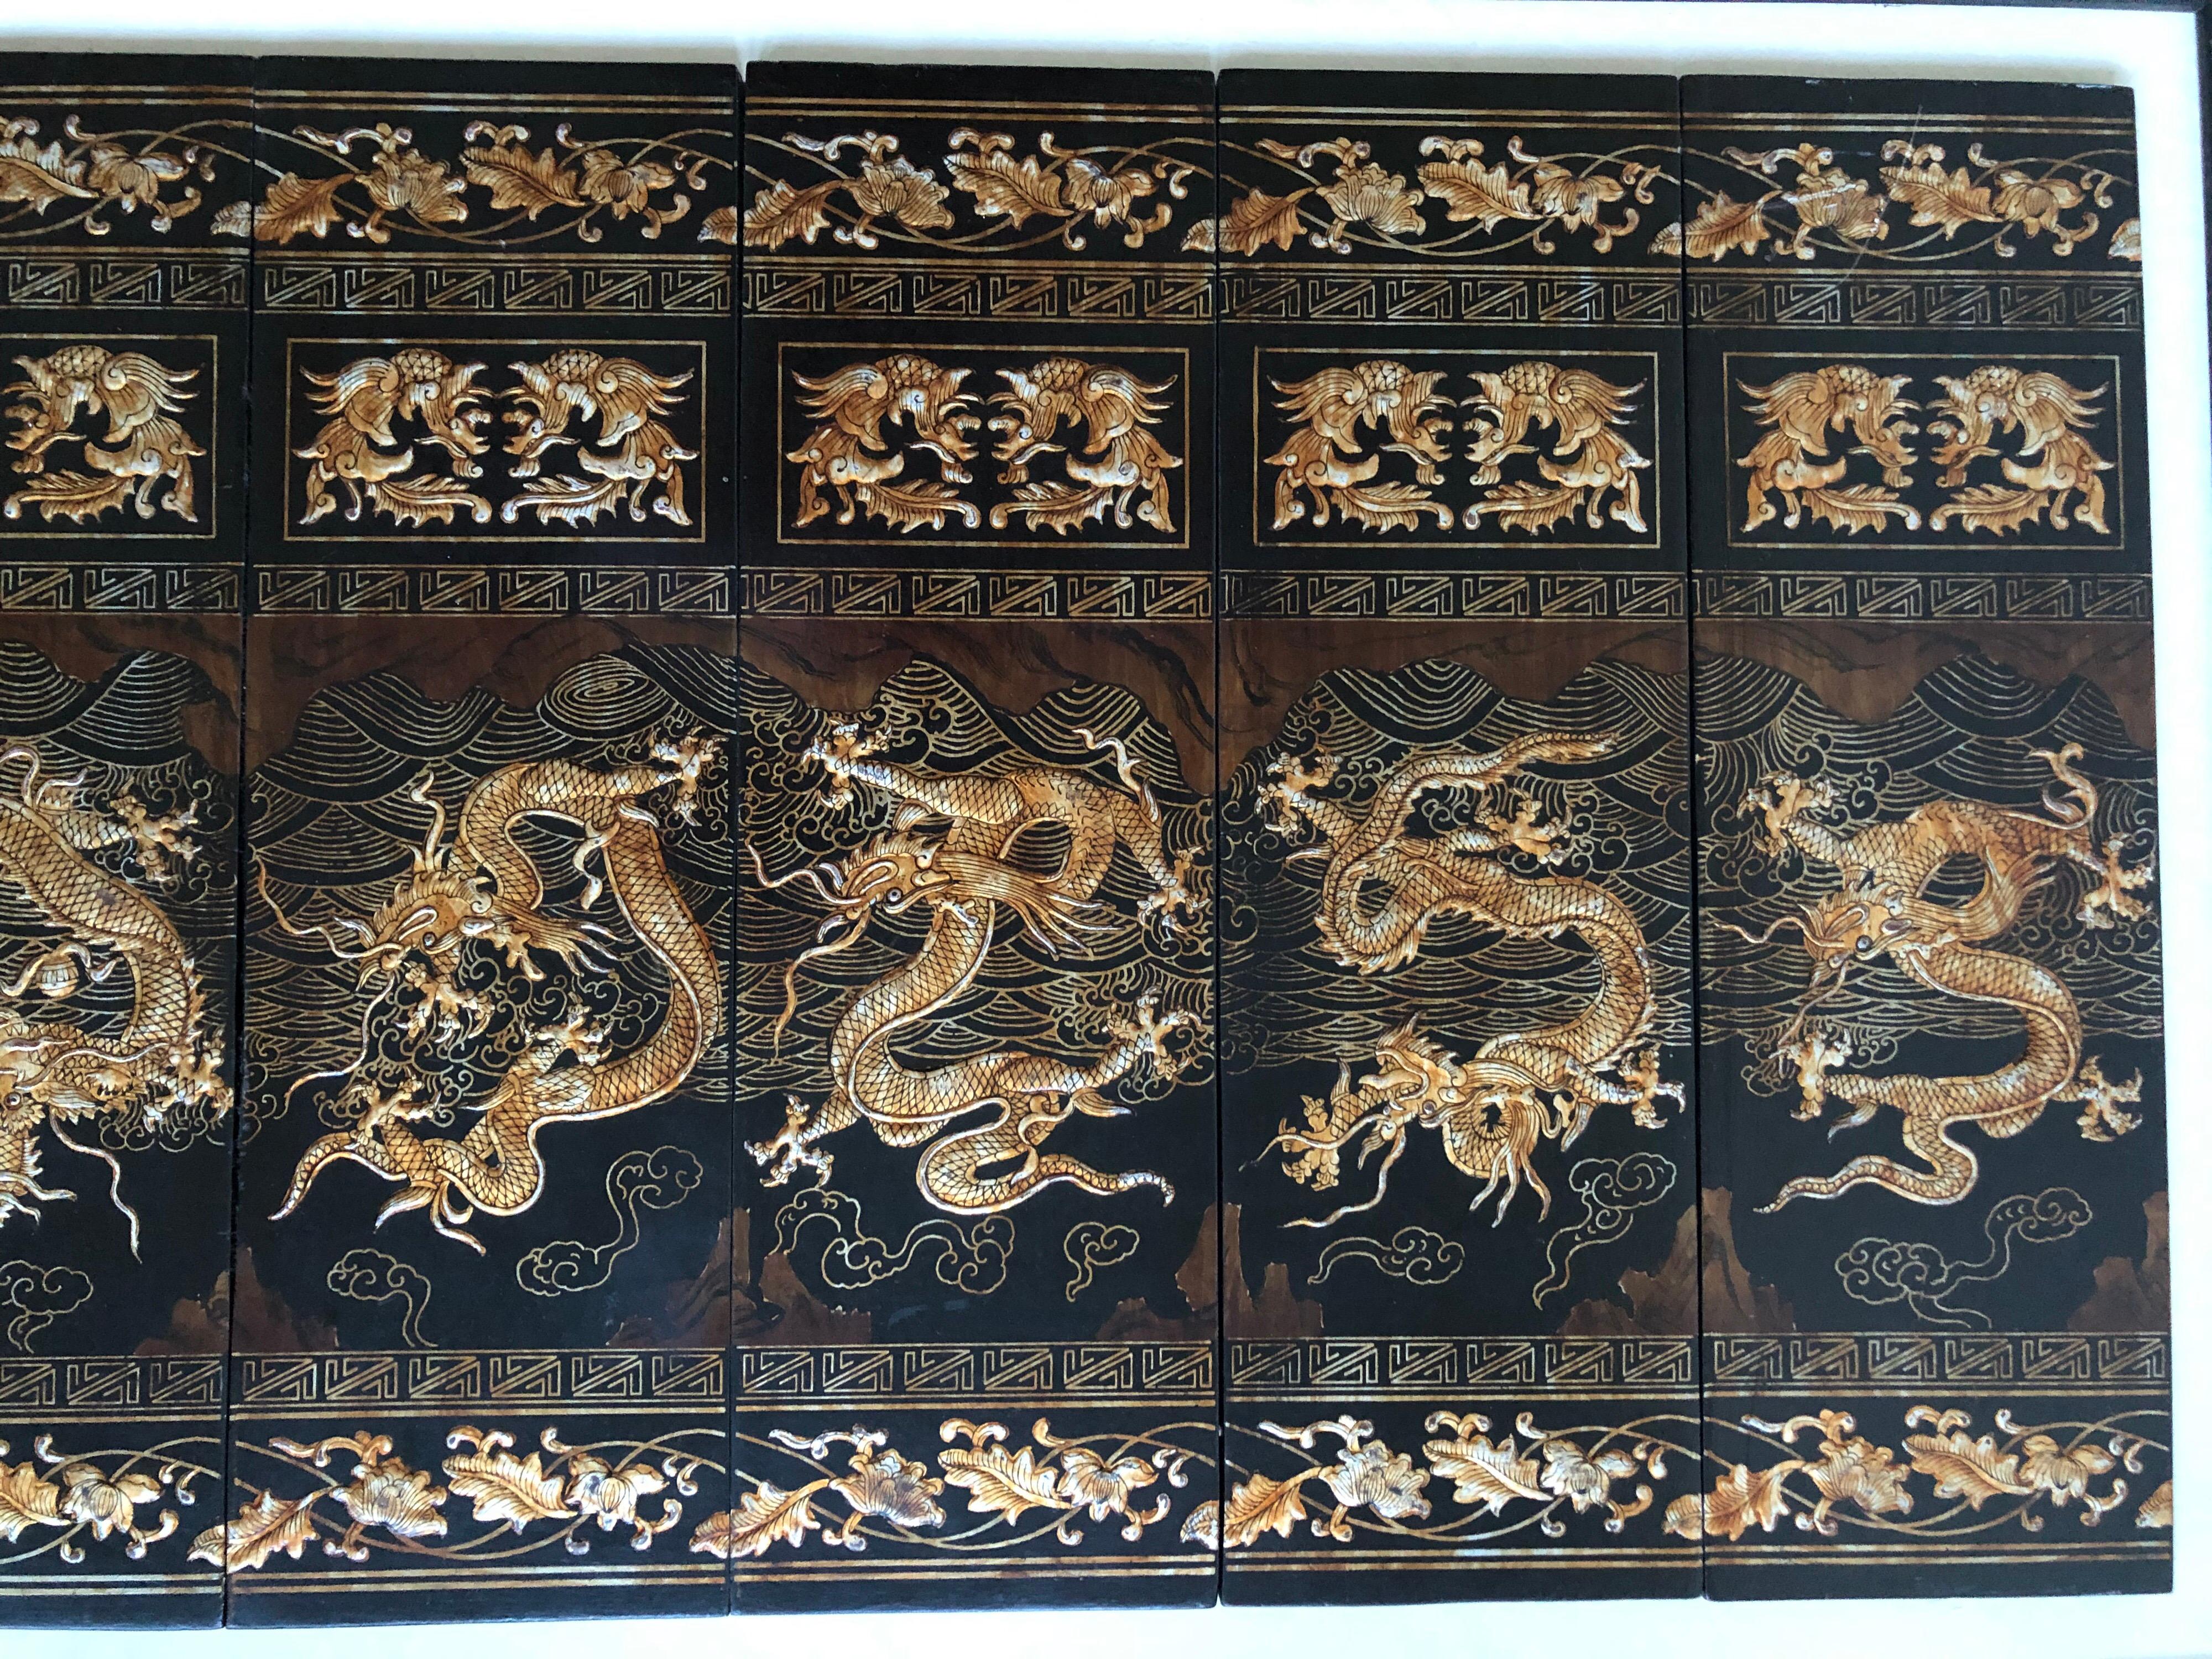 Set of 9 Hand Painted Lacquered Chinese Gold Dragon Wall Panels (Chinesisch)